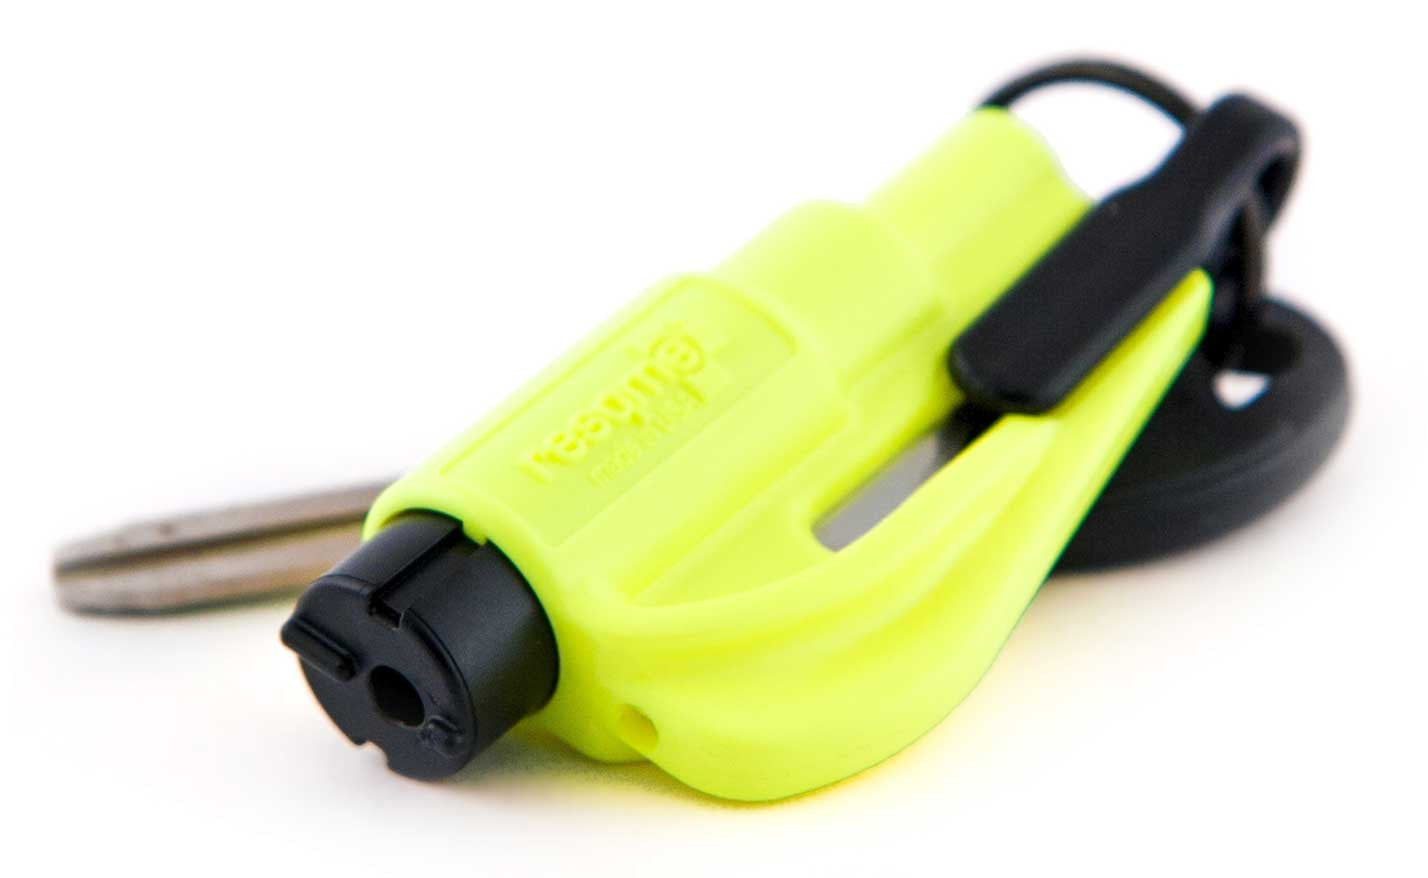 ResQMe Keychain Auto Rescue Device-- Made in USA! NEW COLORS